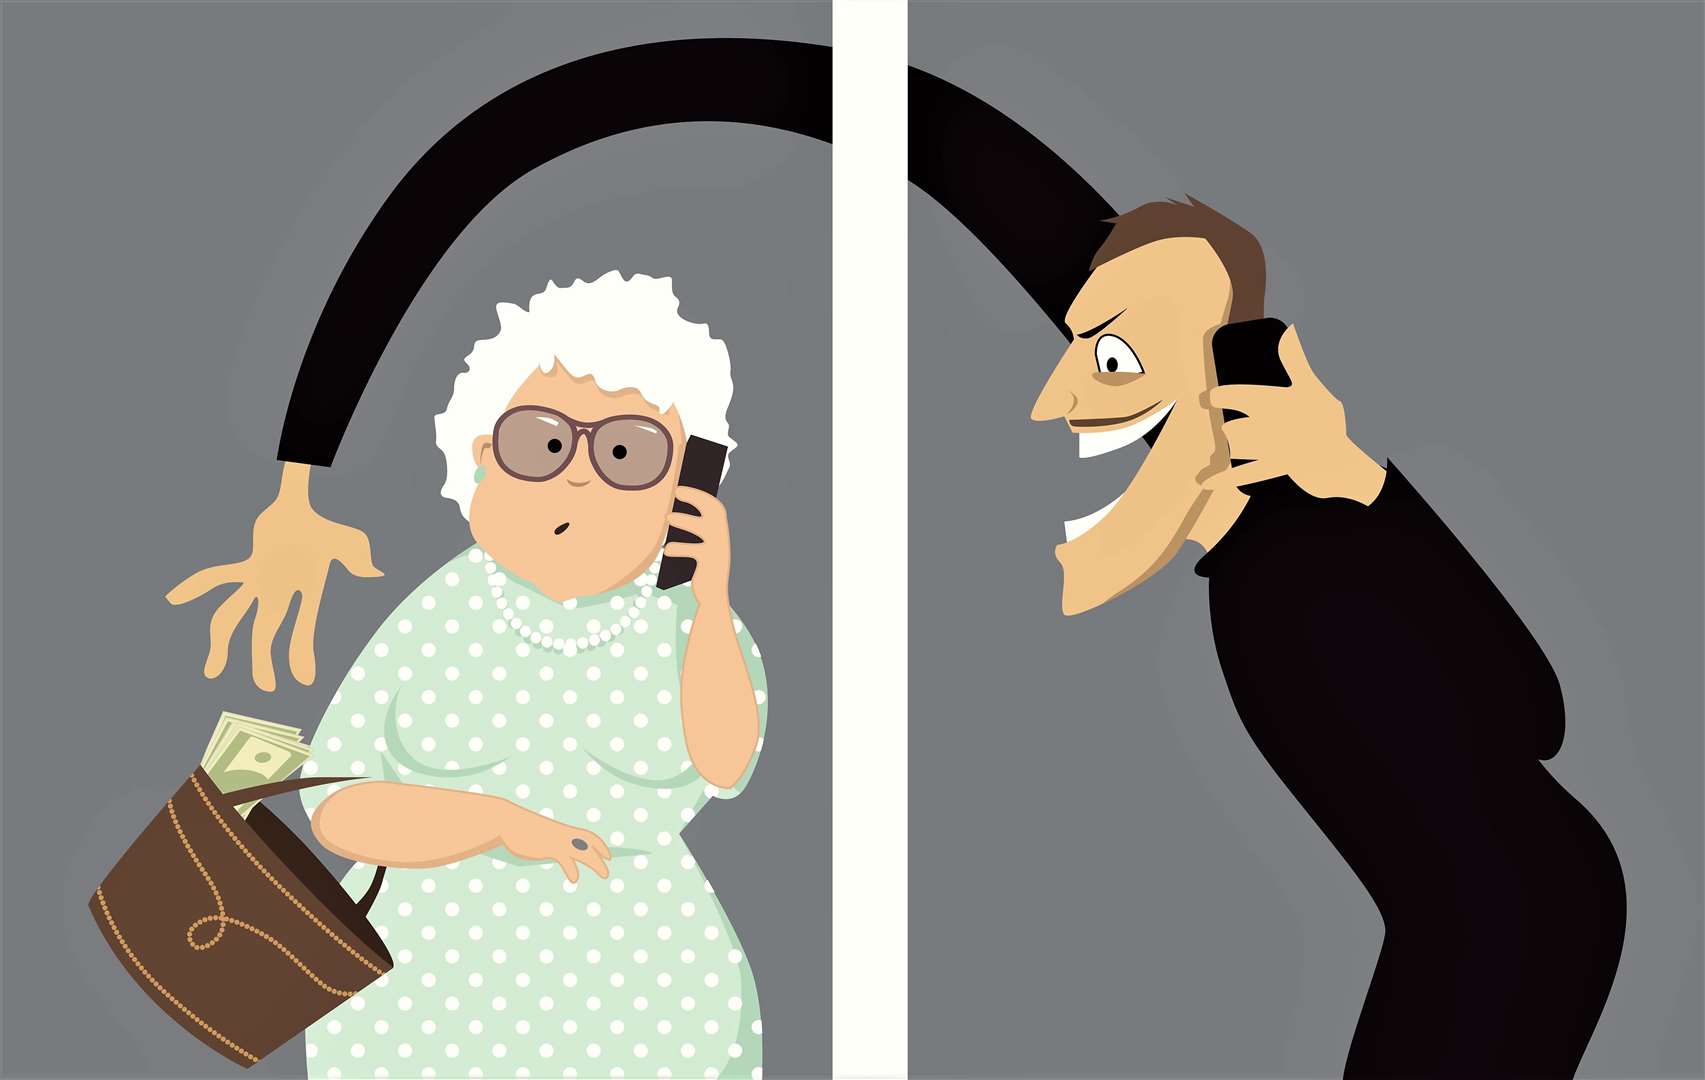 Scammers especially target the elderly and vulnerable within the community.